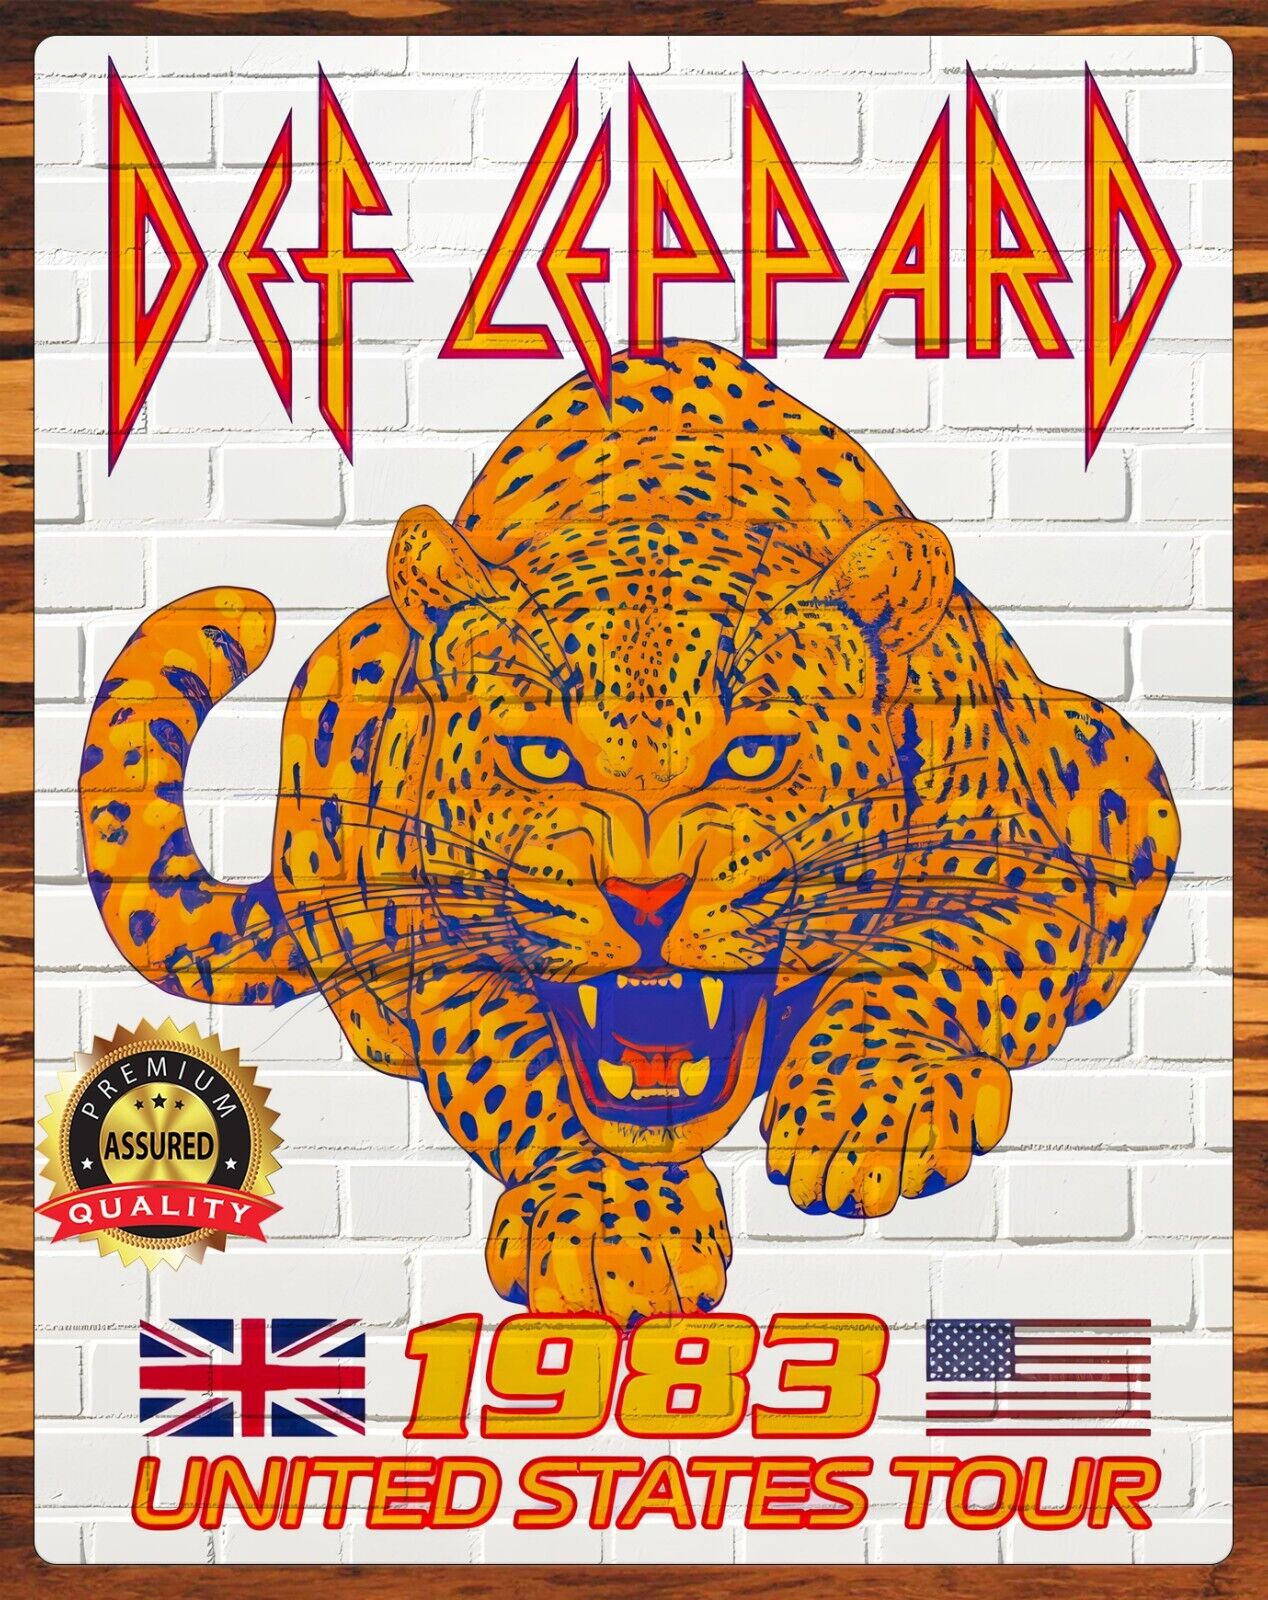 Def Leppard - 1983 United States Tour - Art - Metal Sign 11 x 14